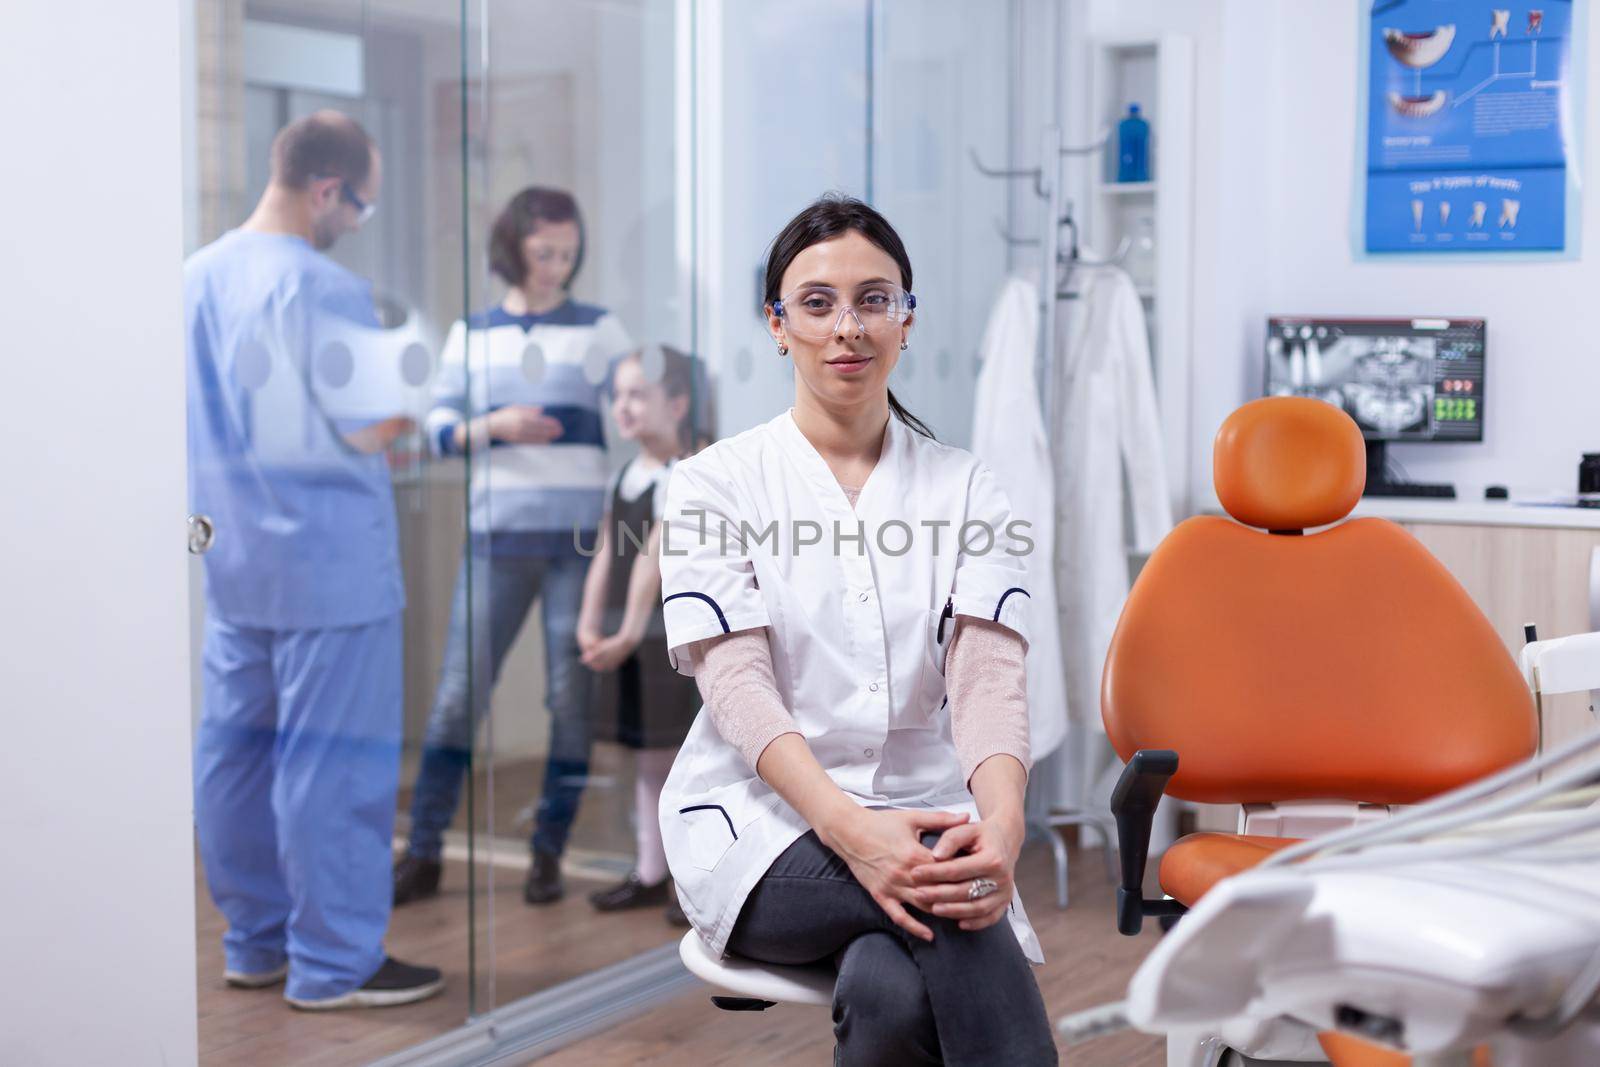 Dentist in dentistiry office sitting on chair while assistant is talking with patients by DCStudio